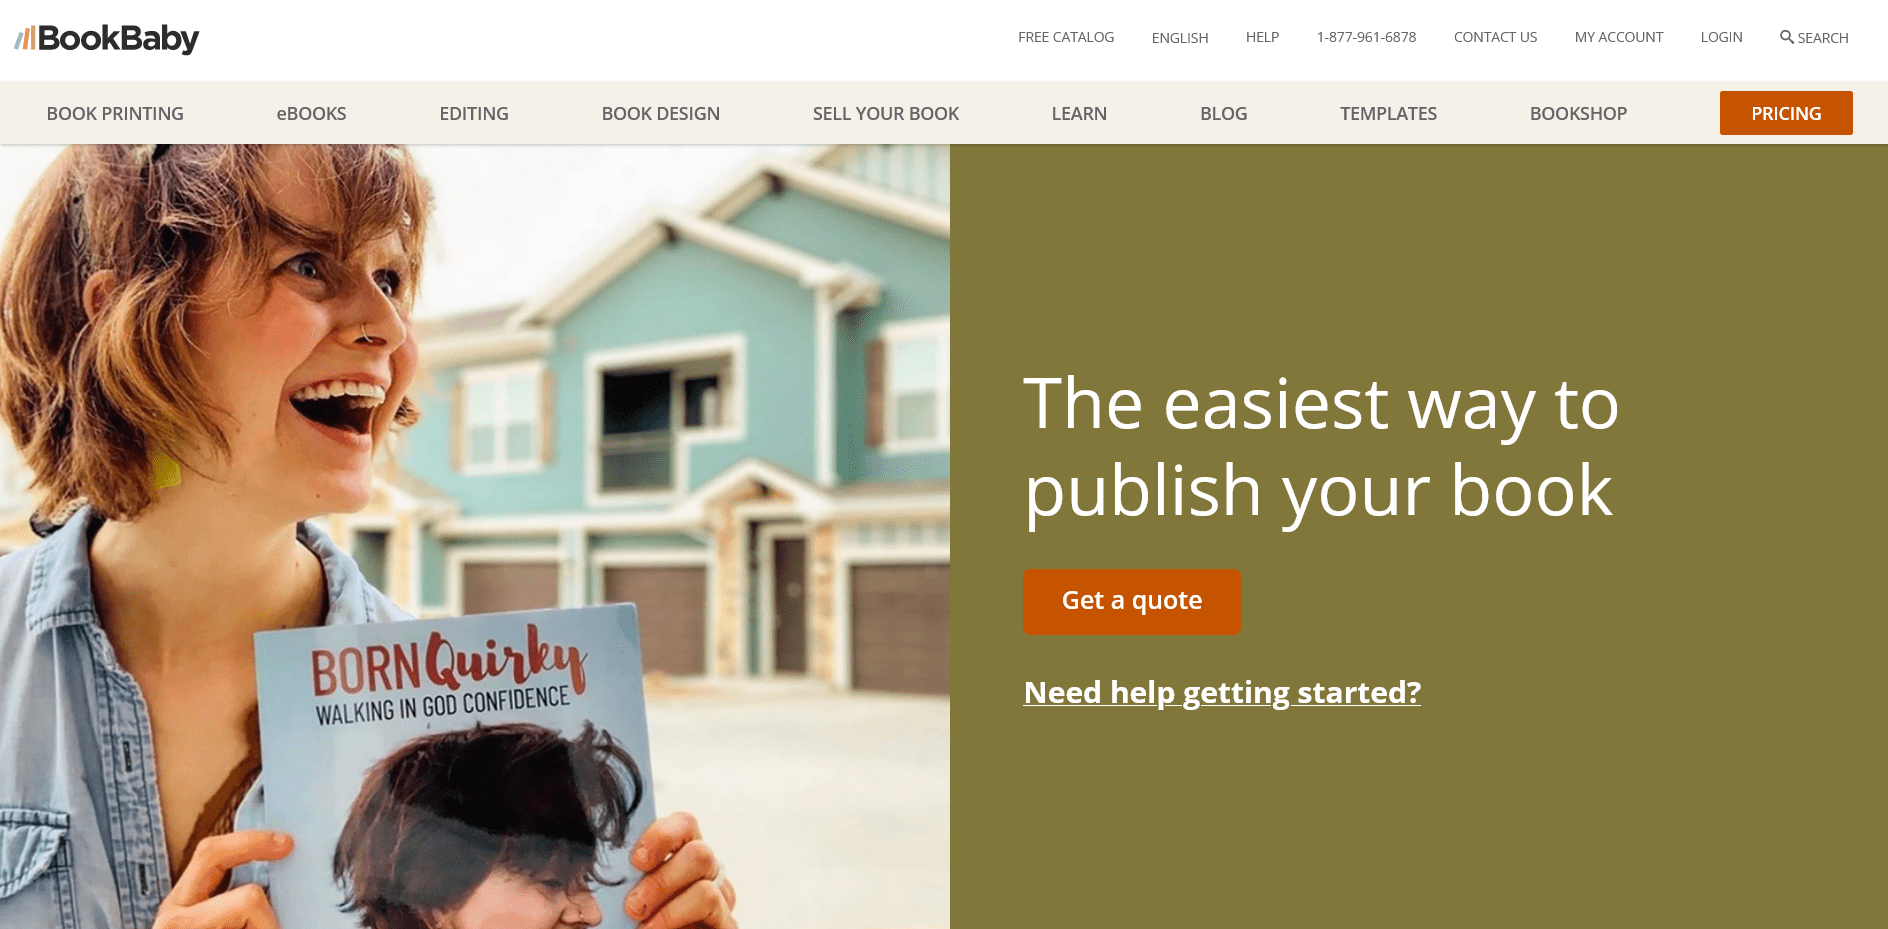 BookBaby makes the list for Book Publishing Platforms